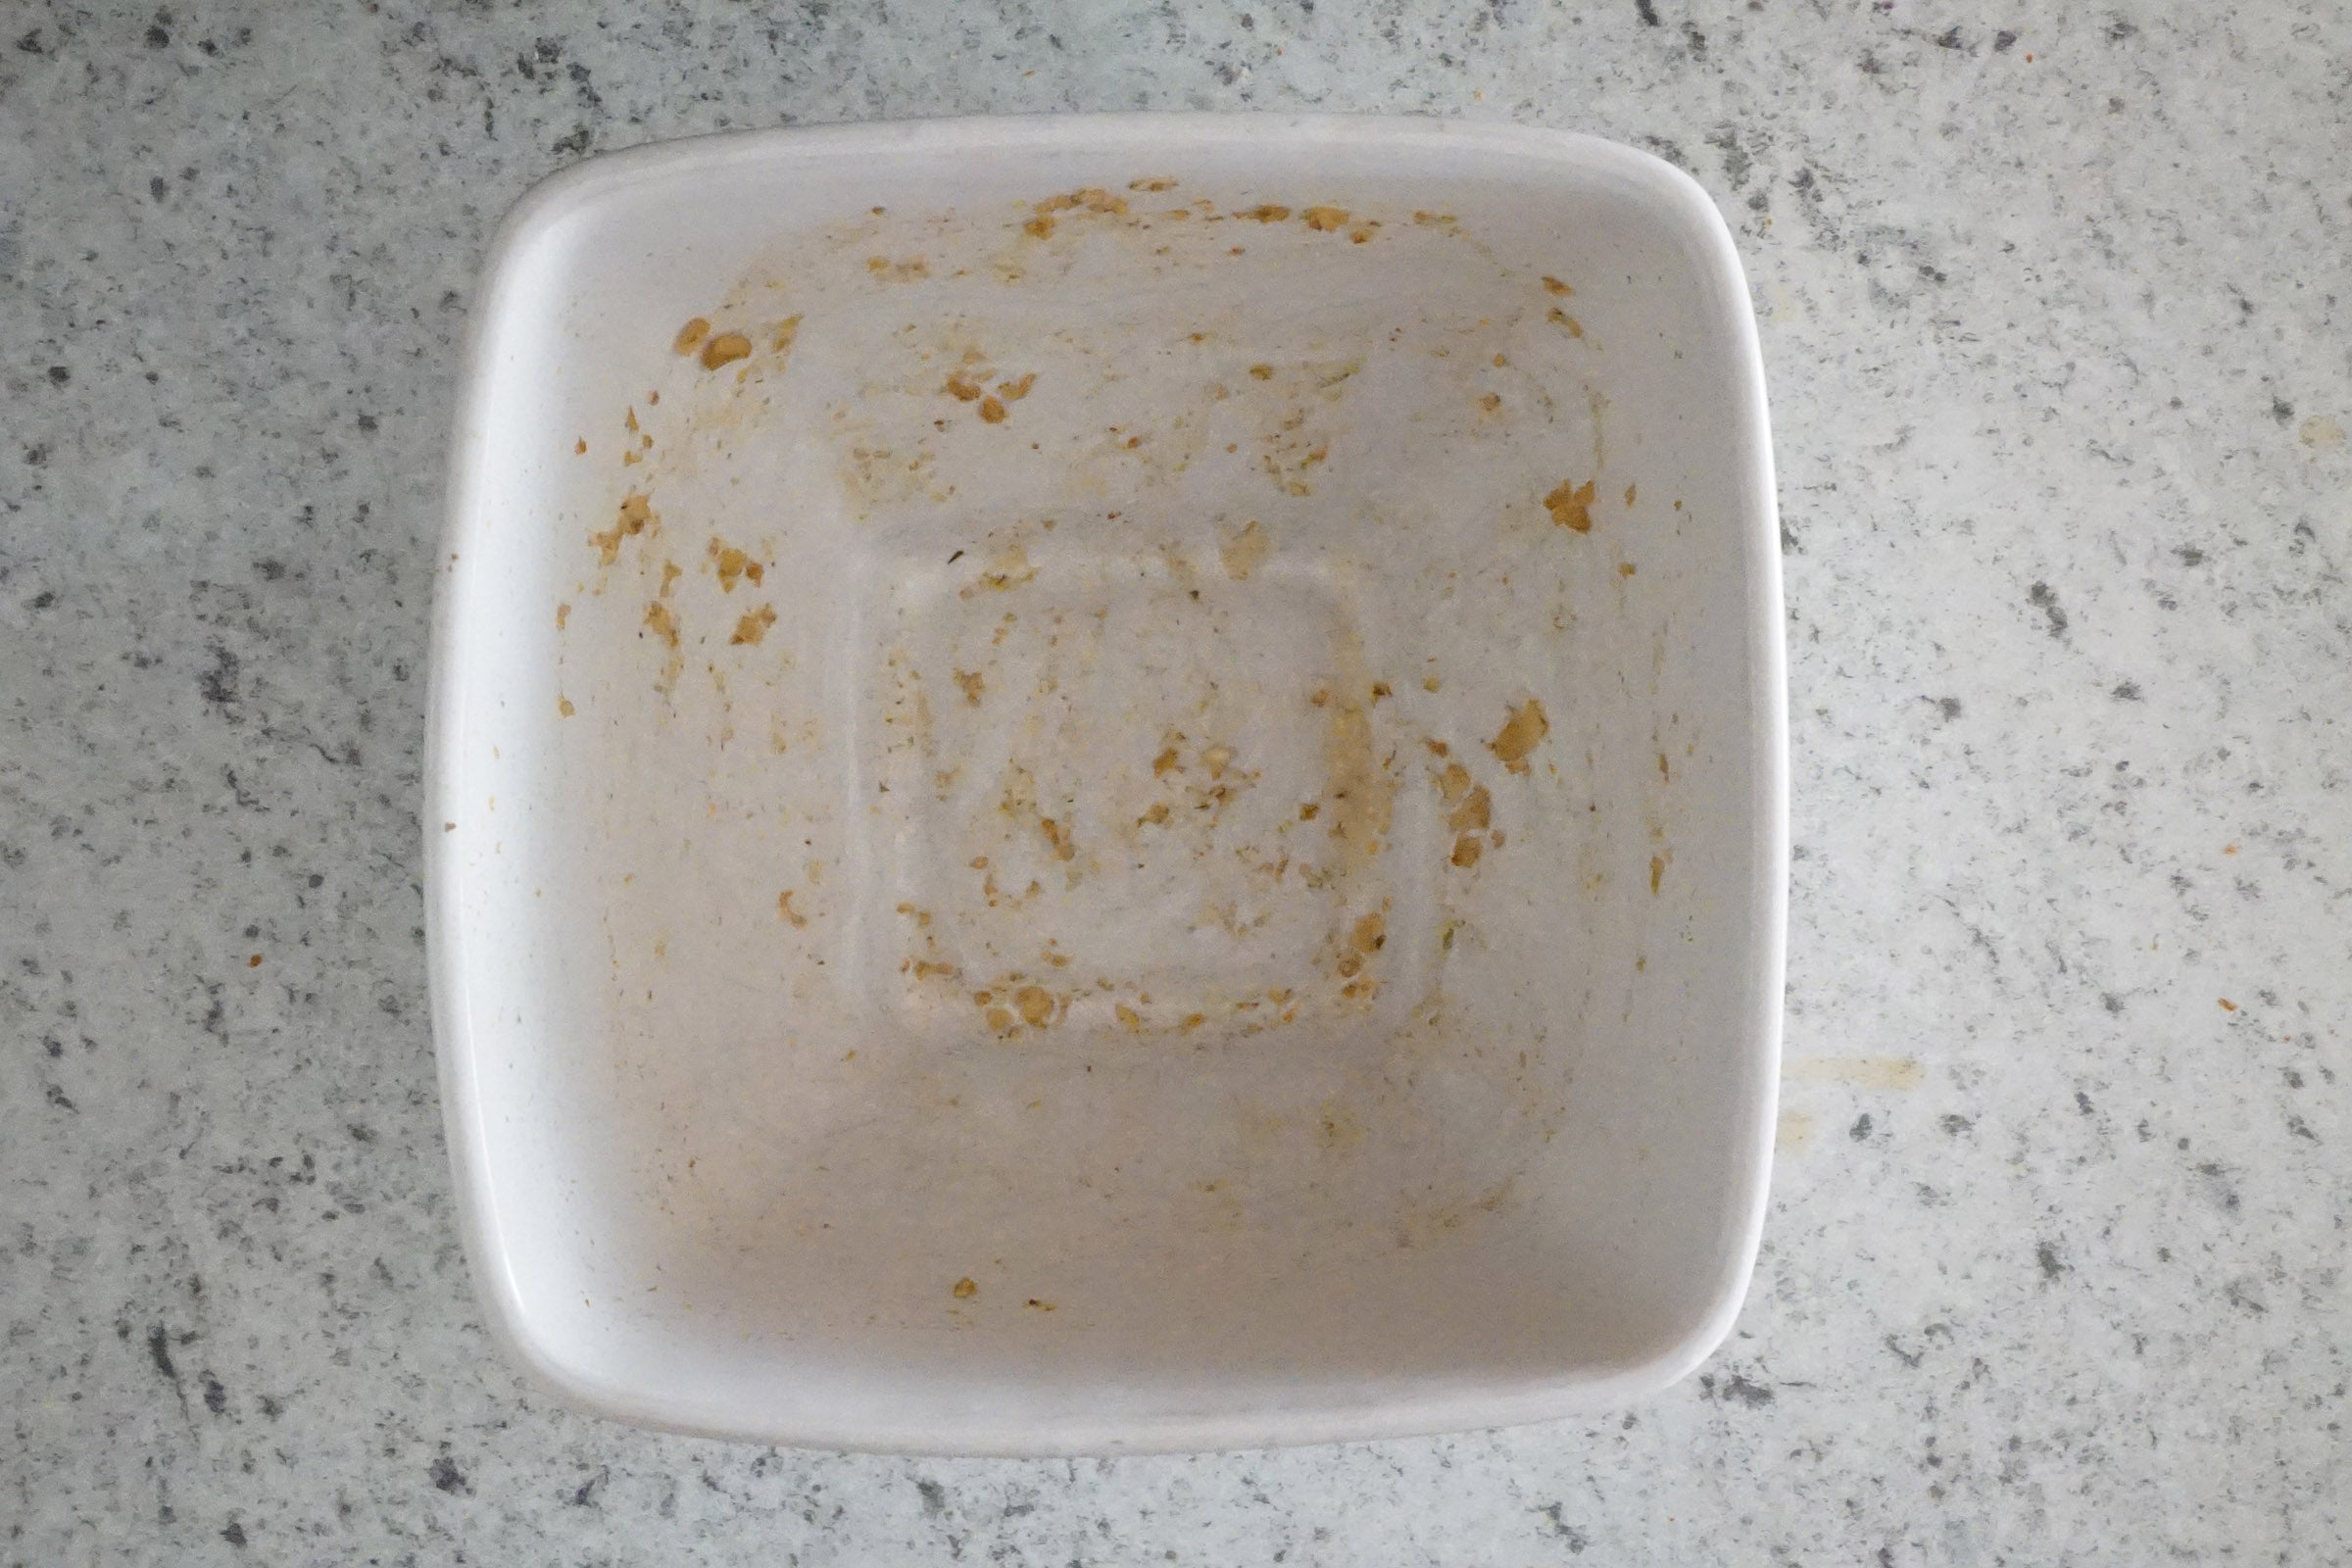 Dishwasher-tested container with remaining food stains.